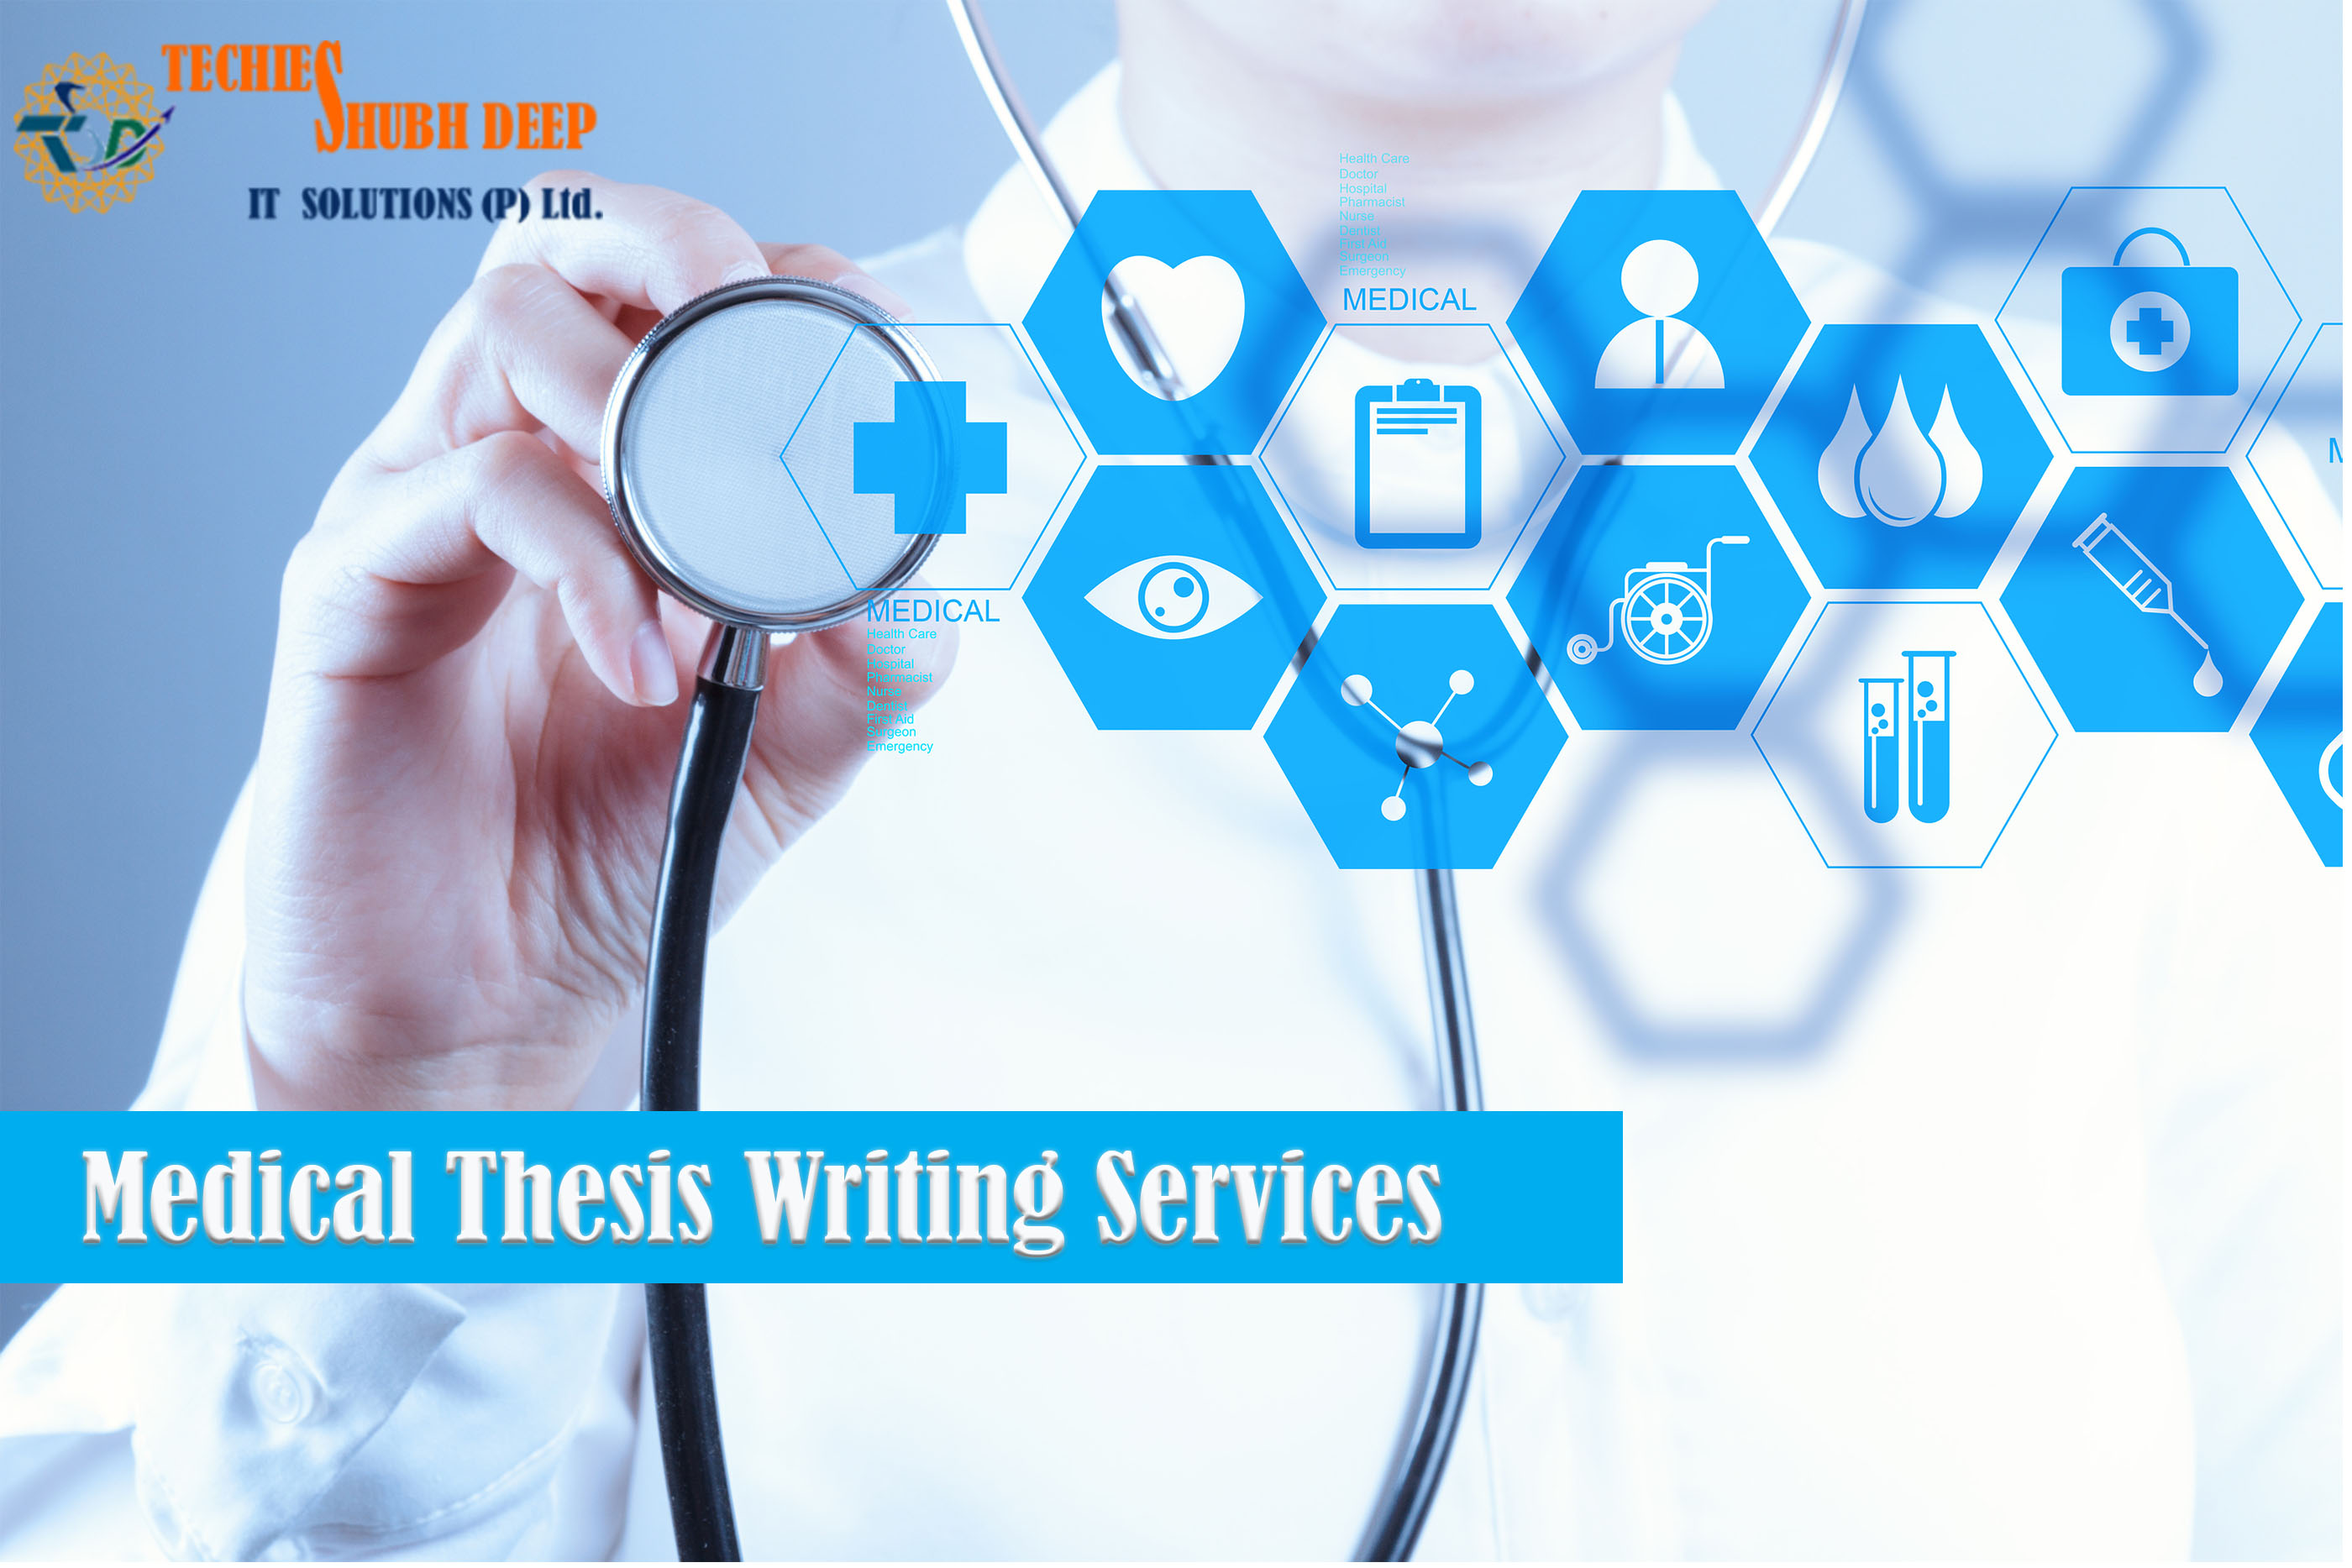 Medical thesis writing services